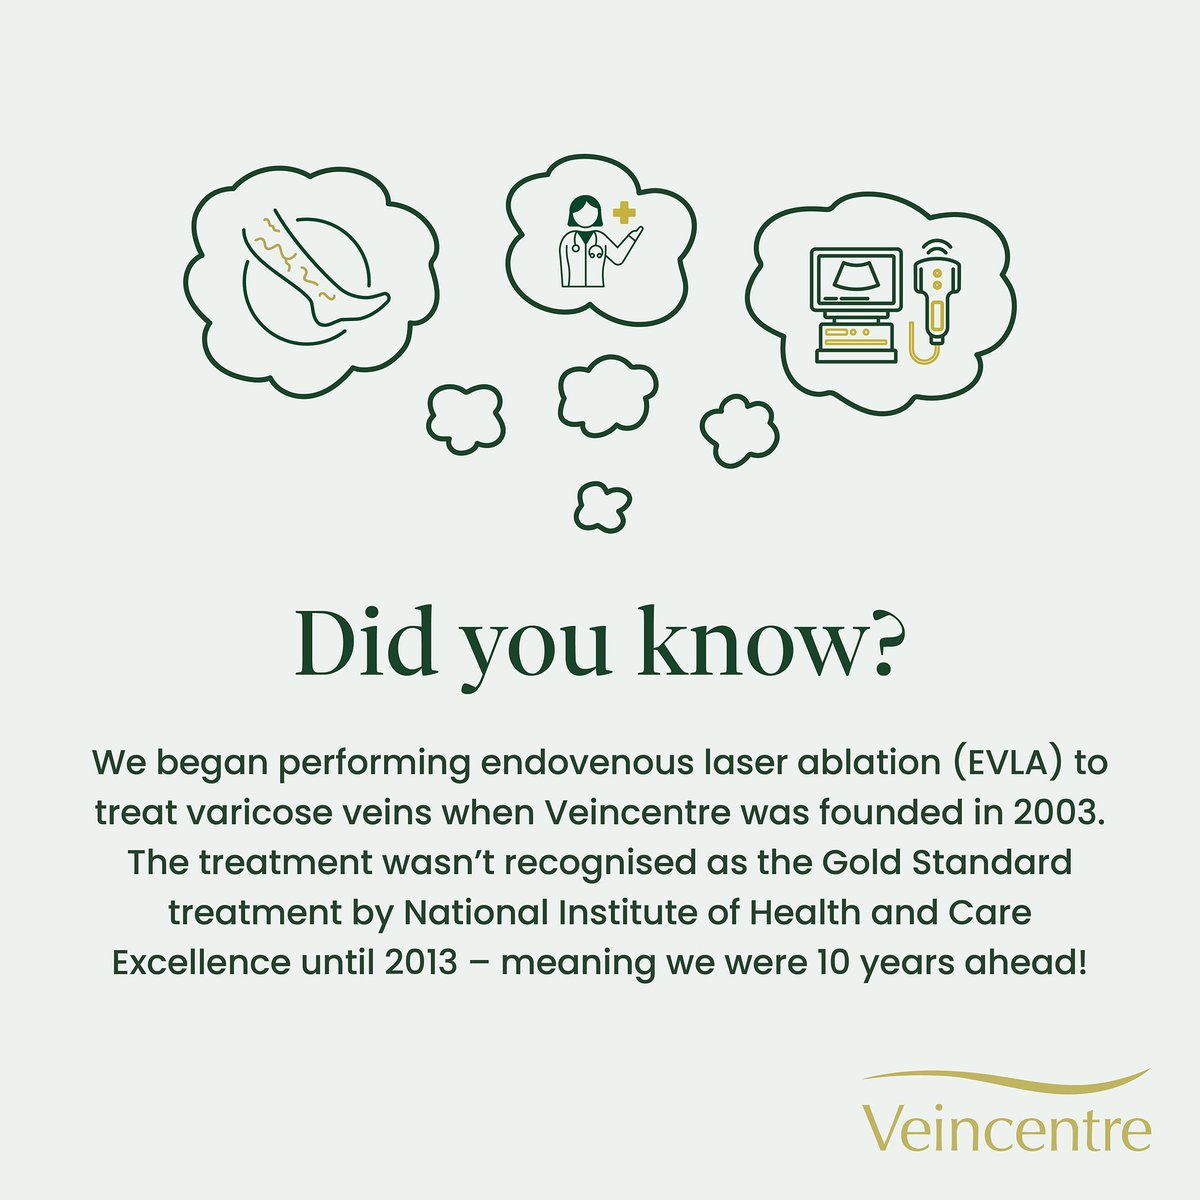 We are the UK's leading vein specialists and are proud to offer treatments recommended by the National Institute of Health and Care Excellence (NICE). #didyouknow #varicoseveins #privatehealthcare #veinspecialists #veinhealth